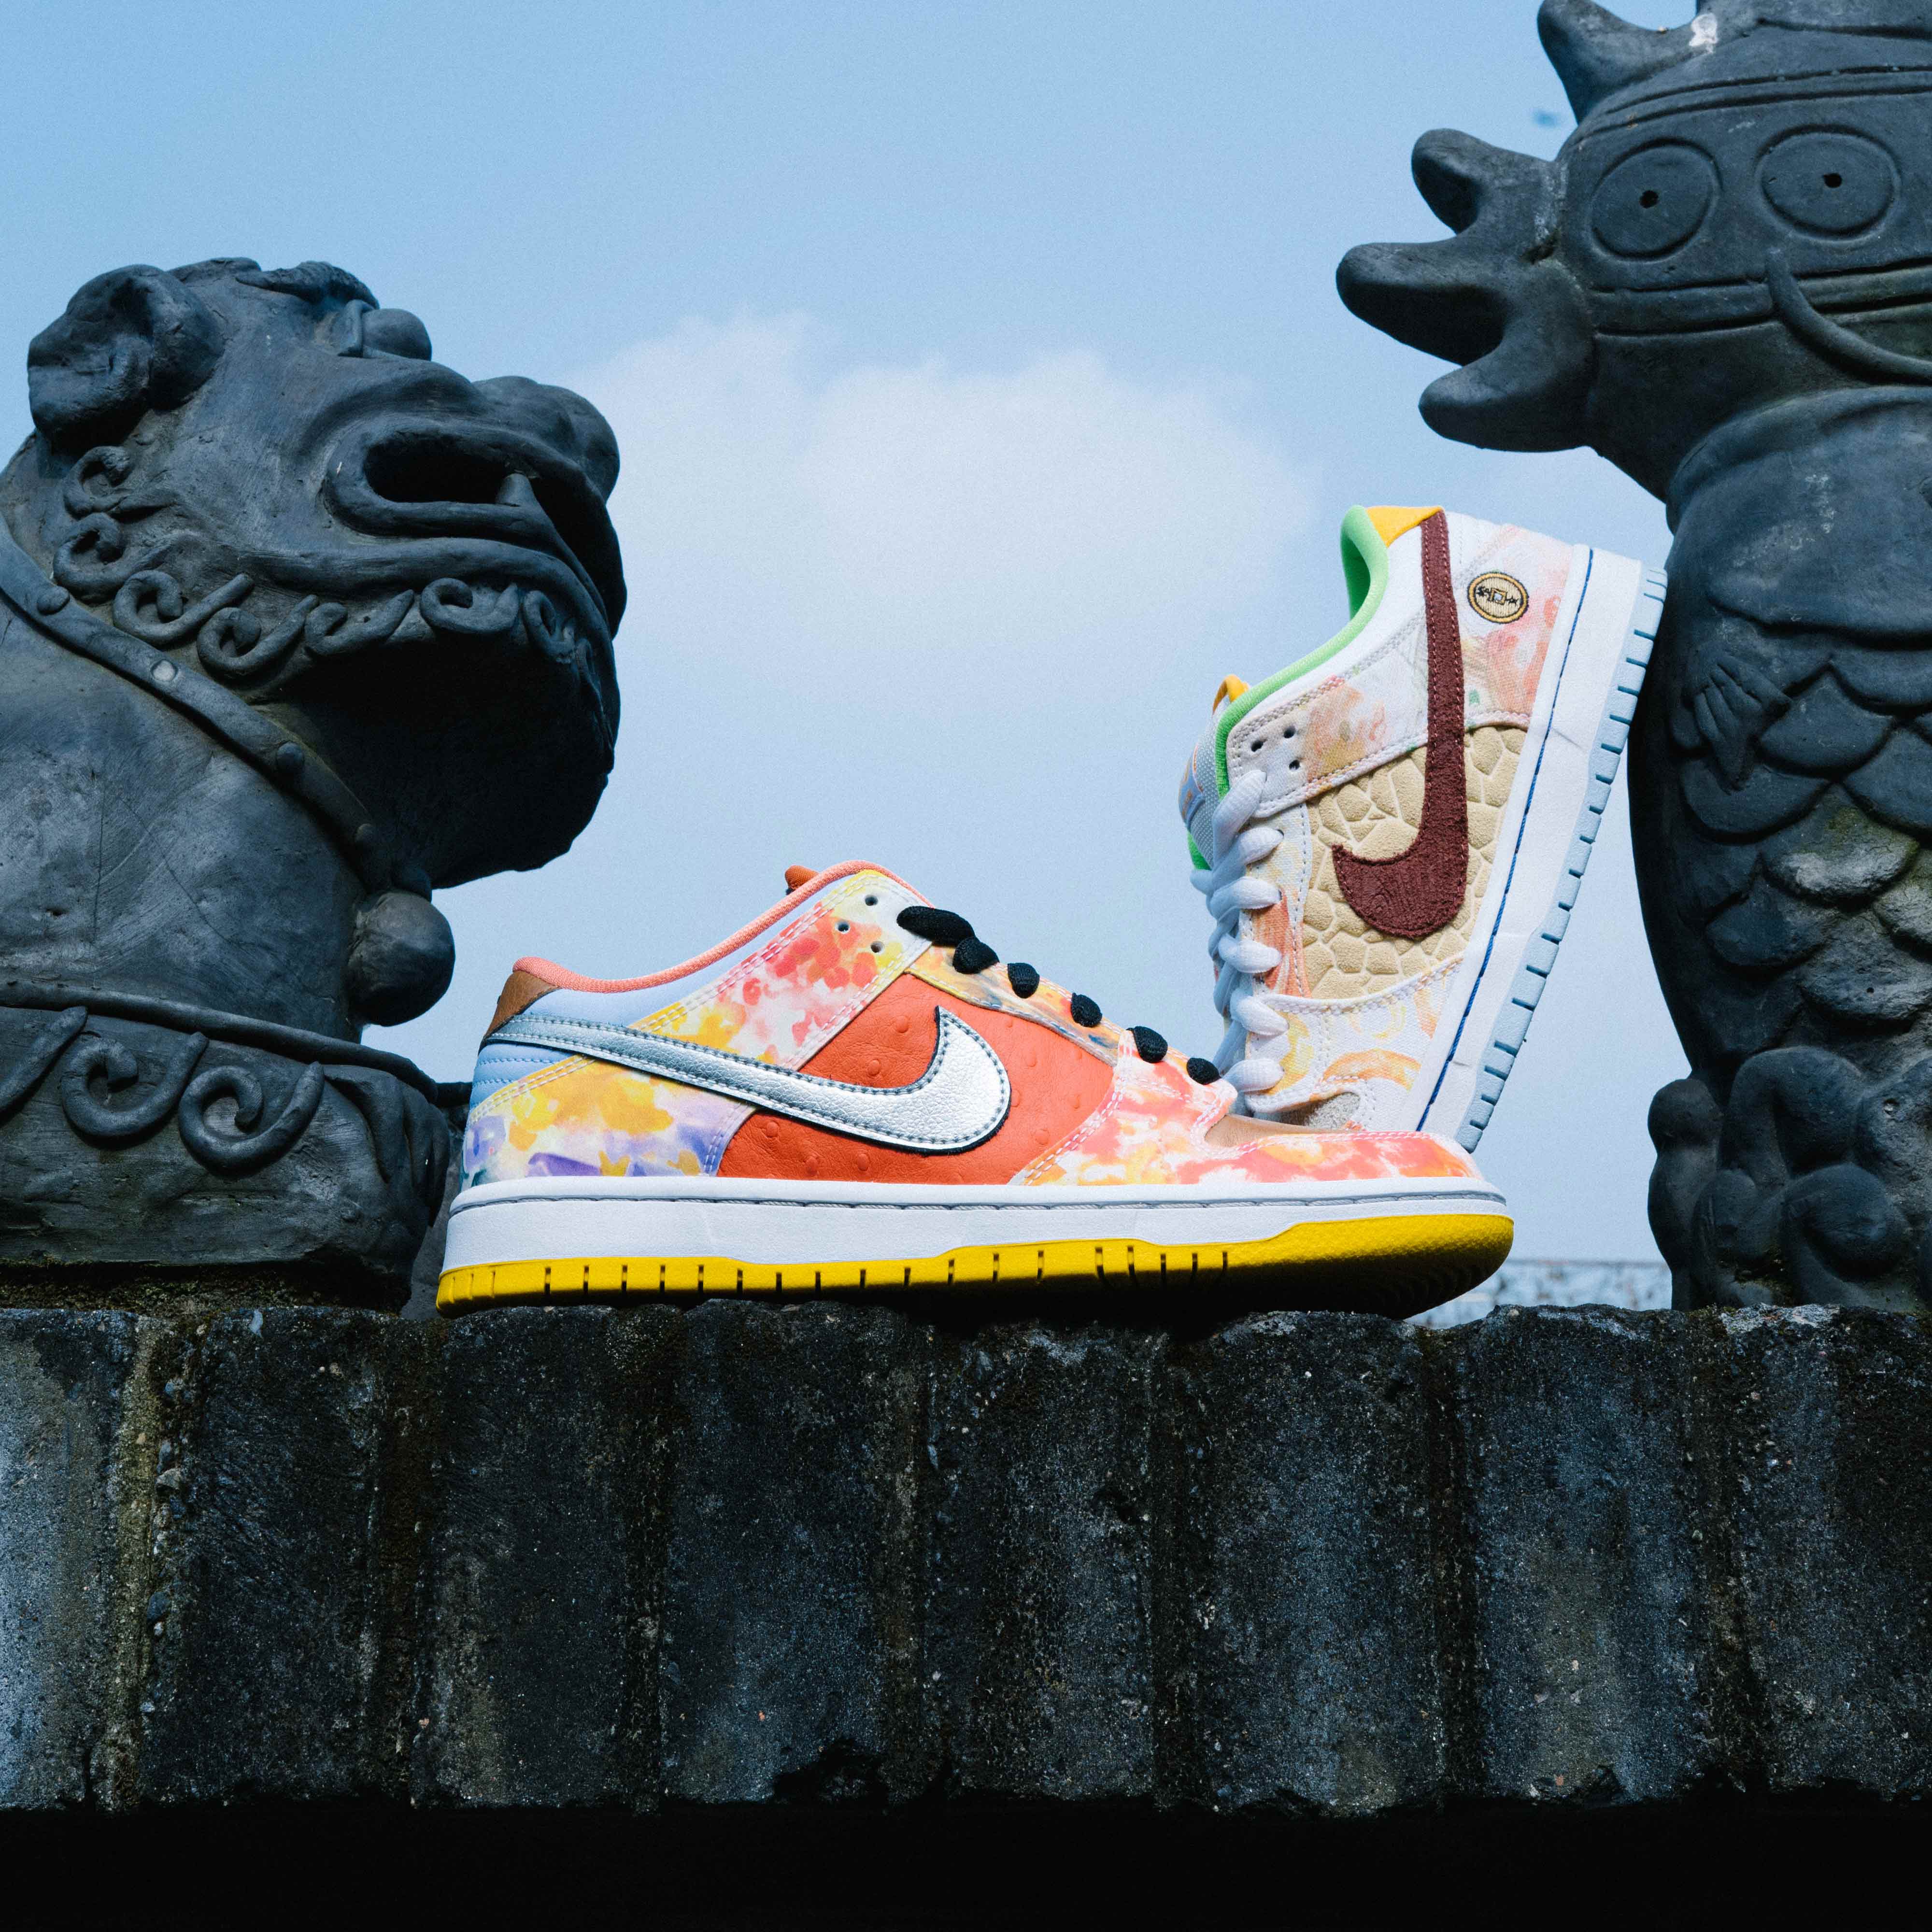 22 Things to Know About the Nike SB Dunk Low Street Hawker article image